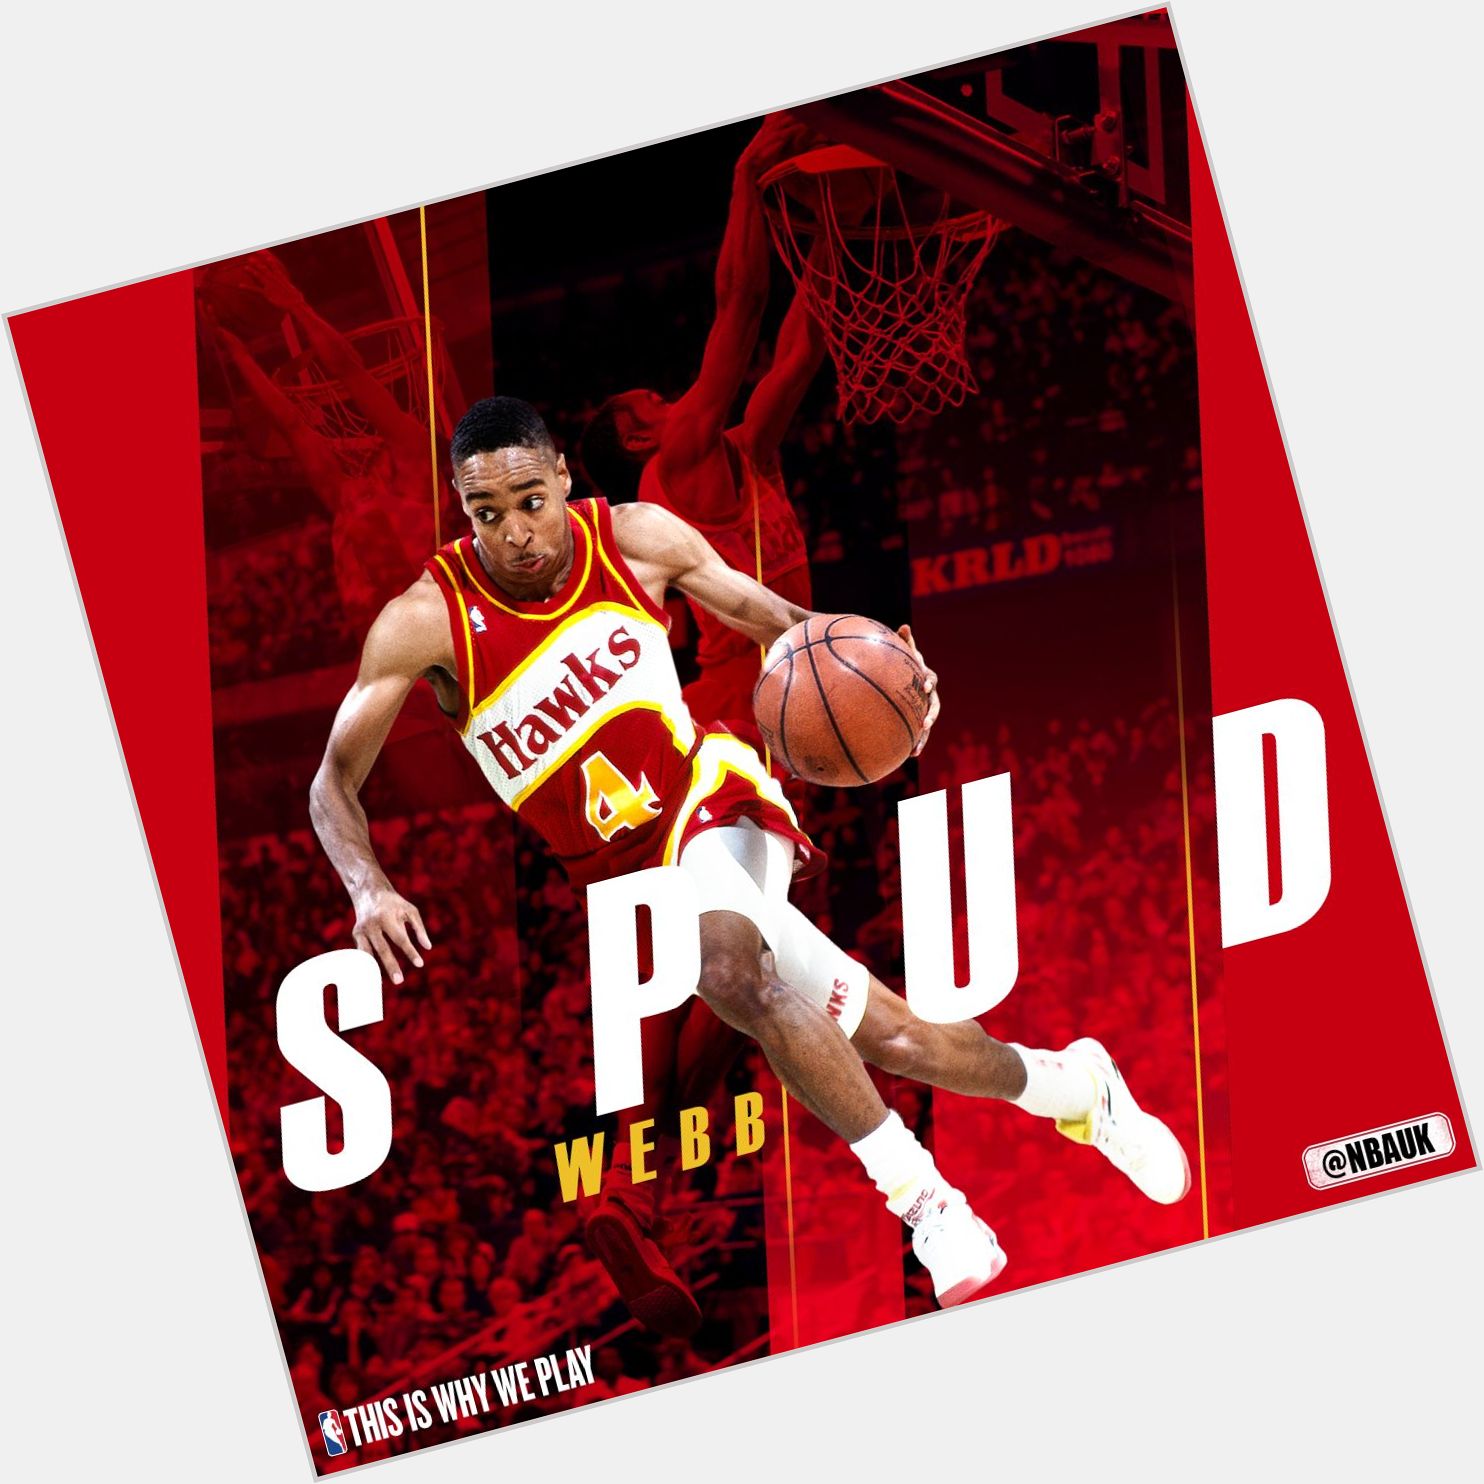   Join us as we wish the 1986 Slam Dunk Champion Spud Webb, a very happy birthday! 